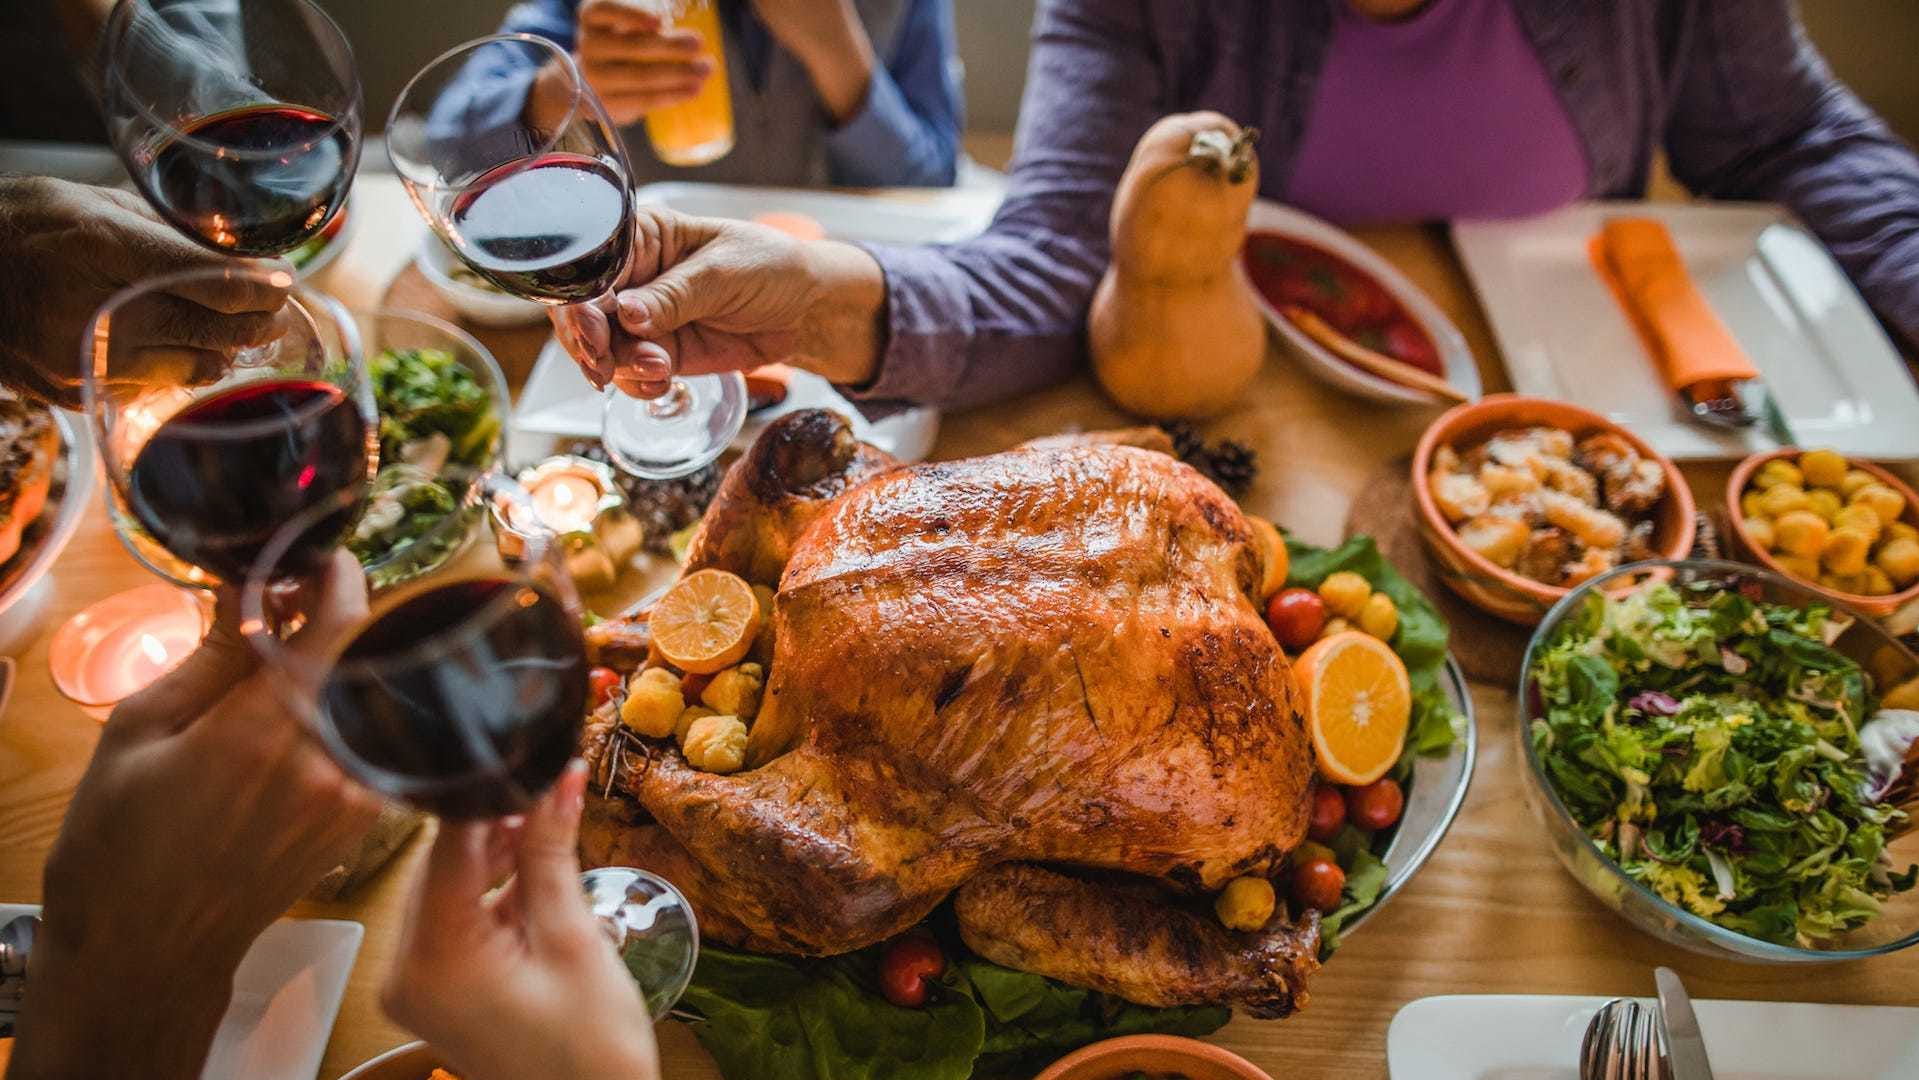 Where to order Thanksgiving meals in Fort Collins